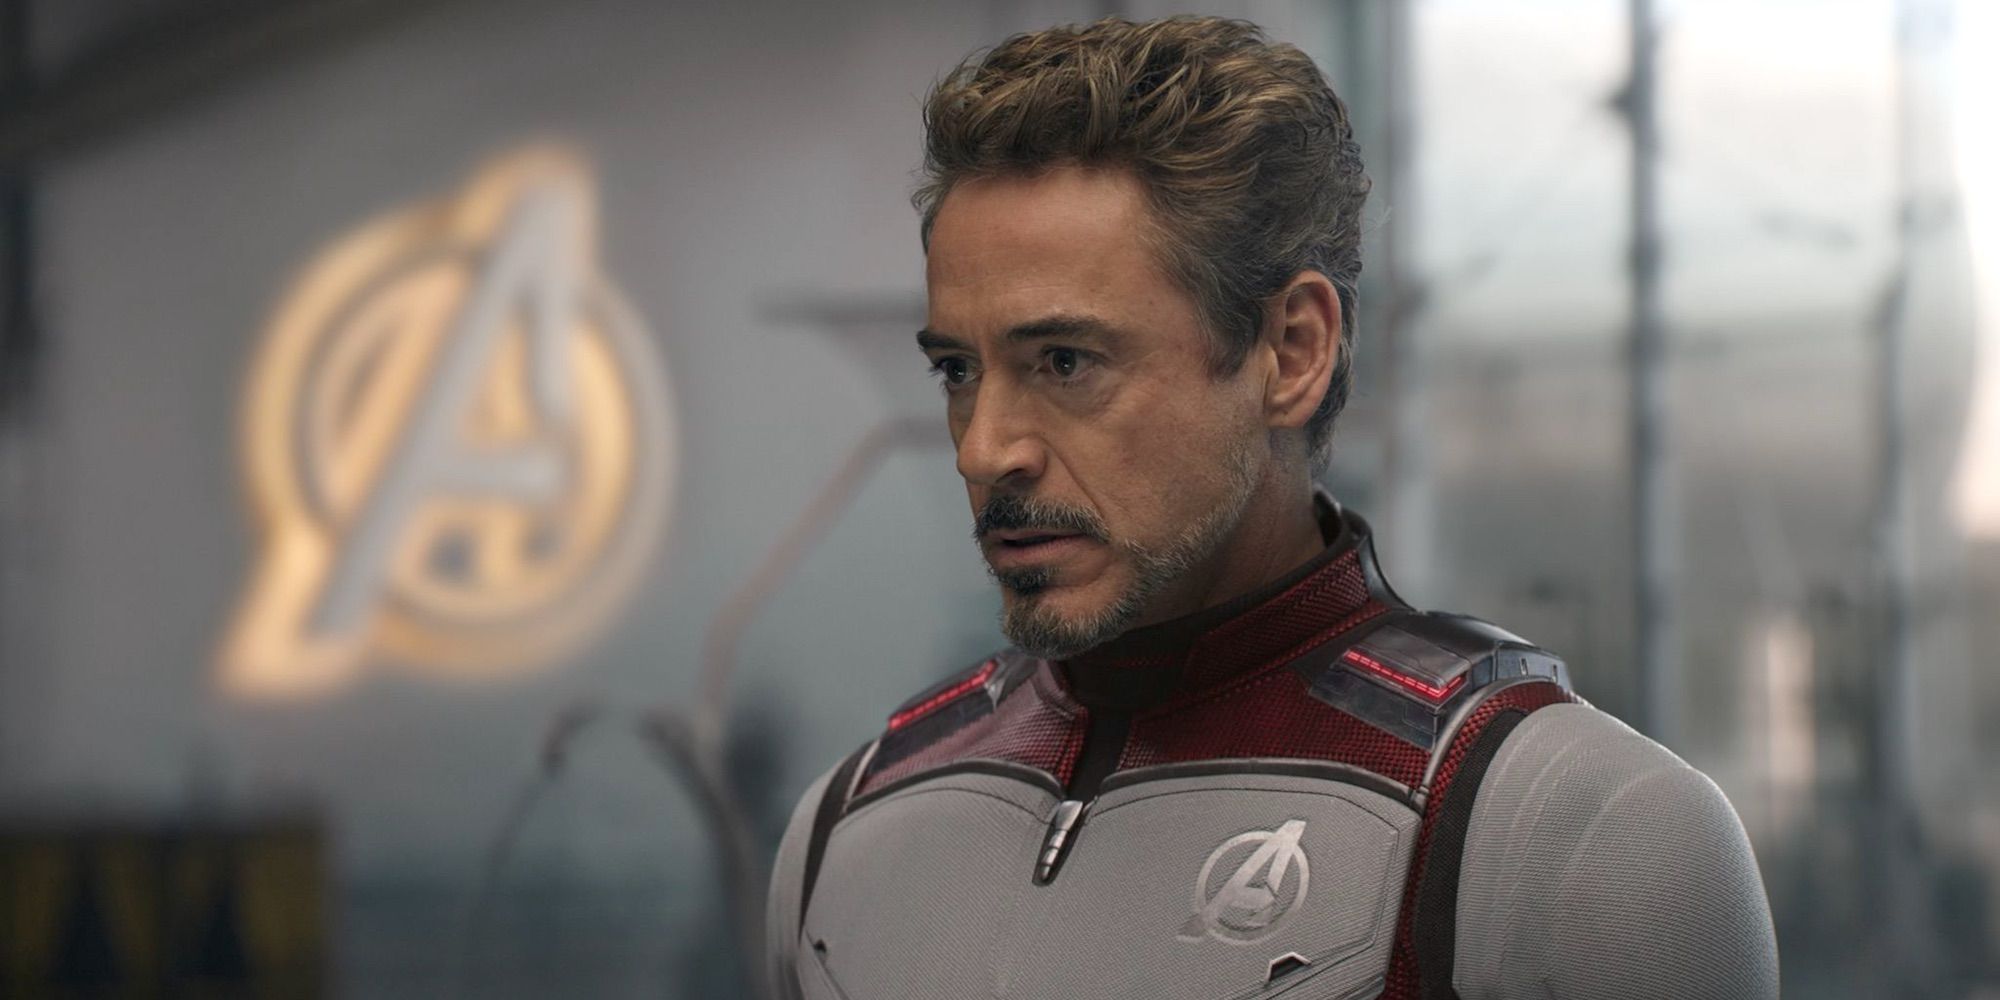 Iron Man is getting ready to time travel in Avengers: Endgame